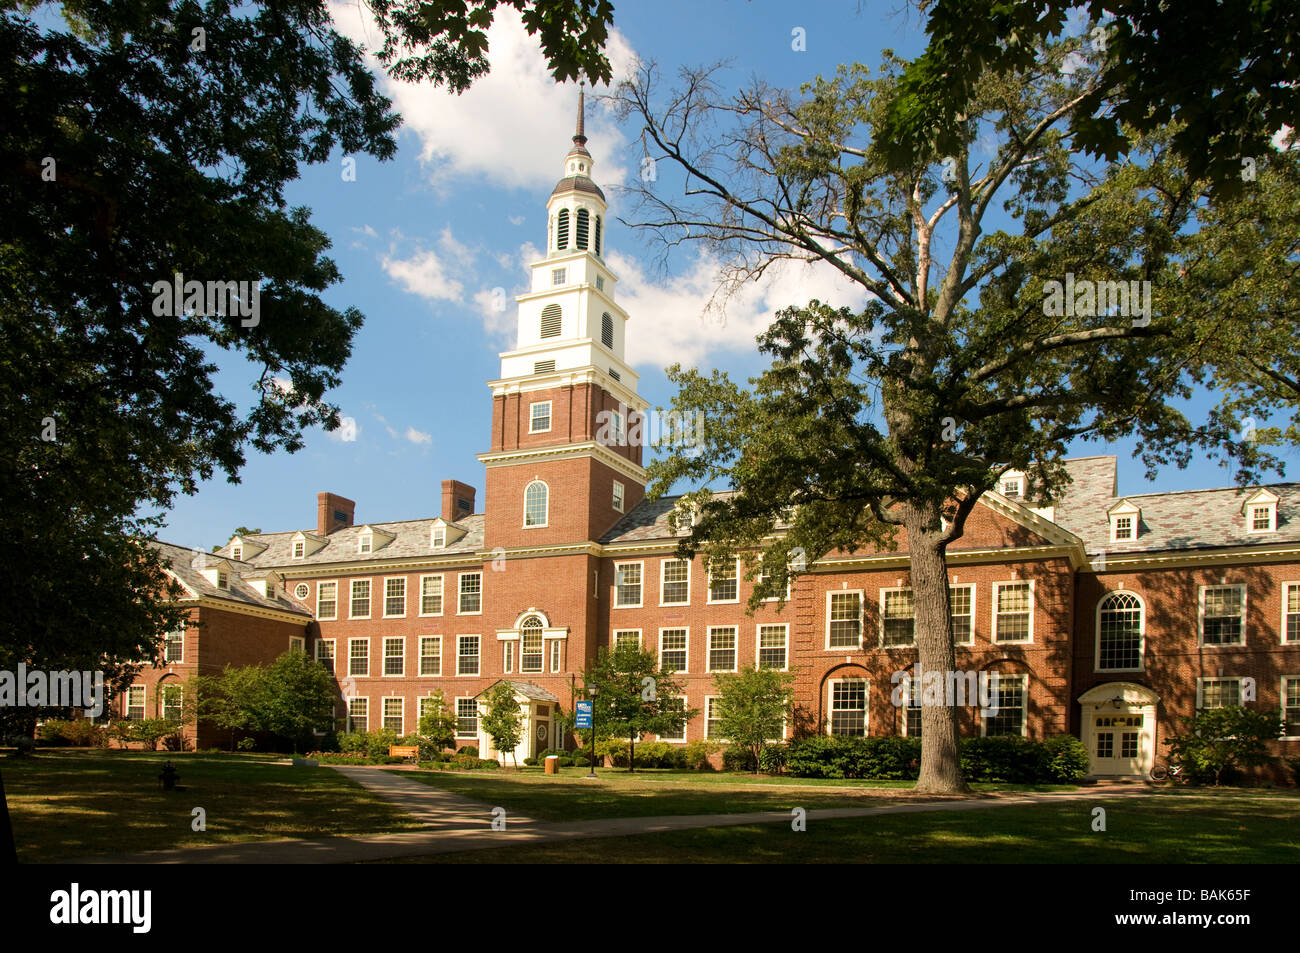 Draper Hall at Berea College which was the first interracial and coeducational college in the South Berea Kentucky Stock Photo